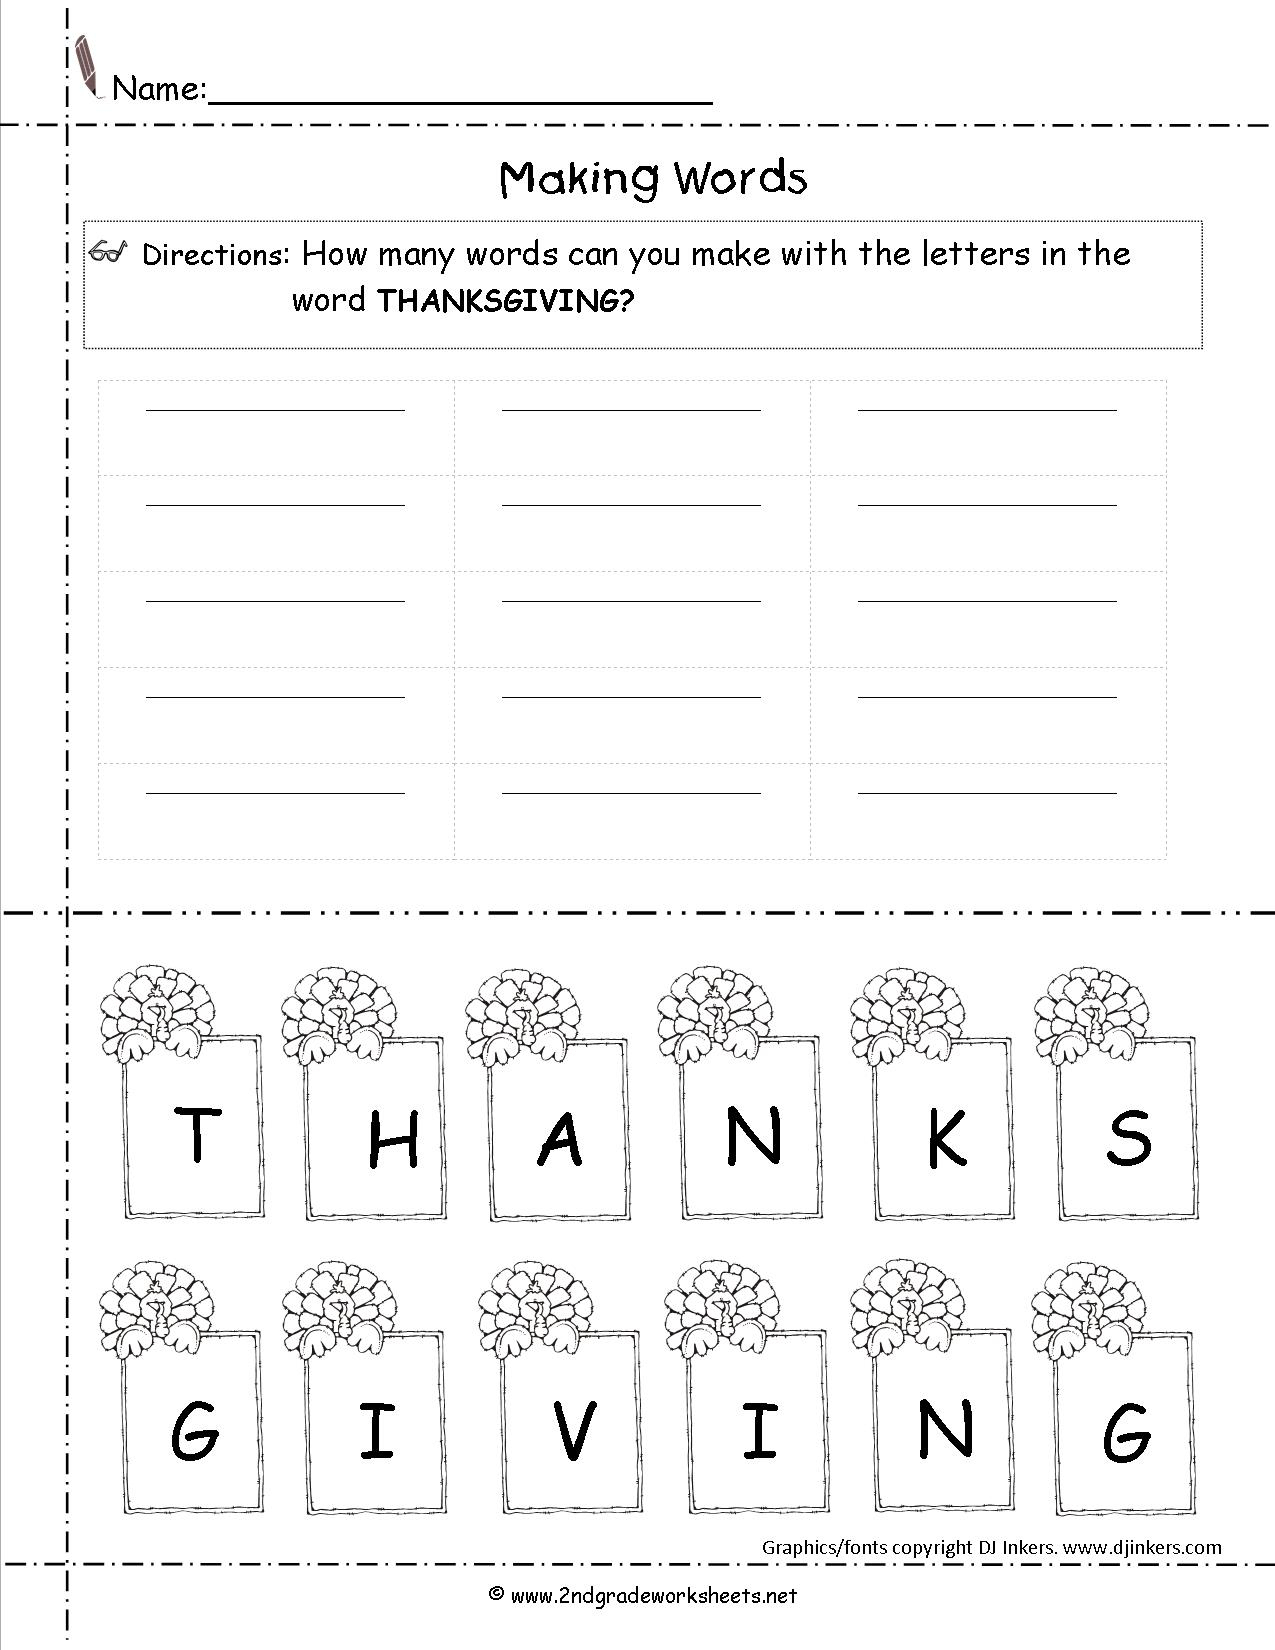 Thanksgiving Printouts And Worksheets - Free Printable Thanksgiving | Free Printable Thanksgiving Math Worksheets For 3Rd Grade